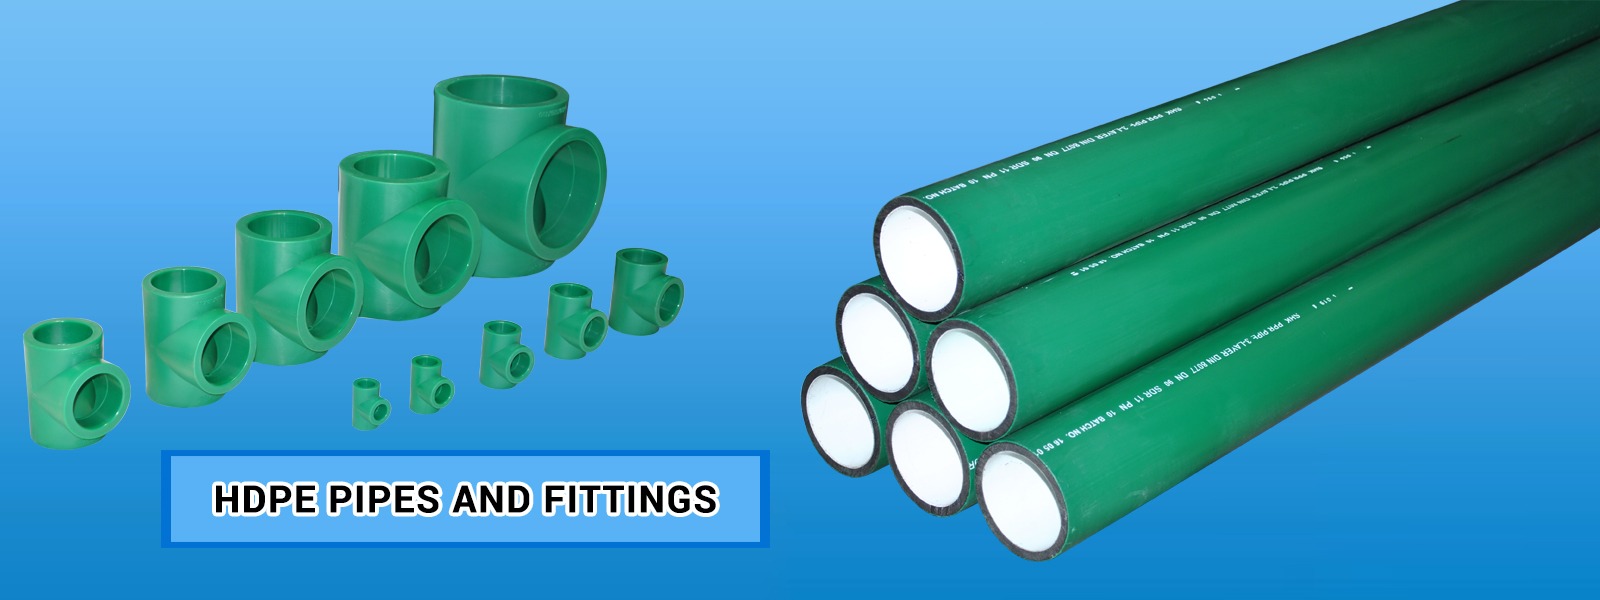 PPR-C pipes and fittings